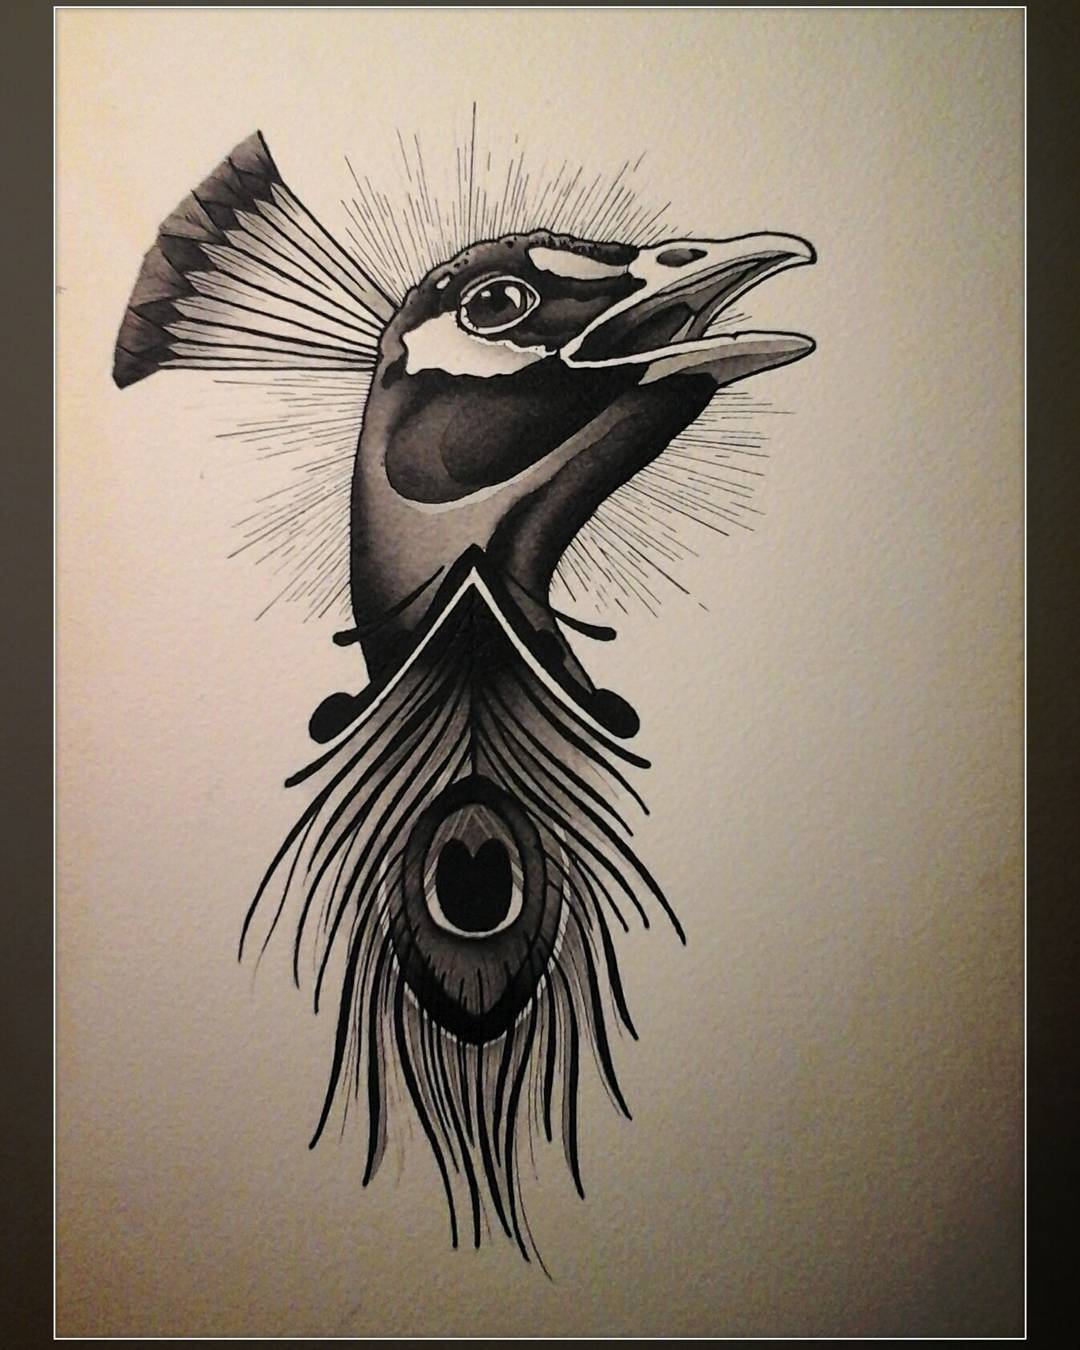 New flash in progress....black peacock...wpuld love to tattoo this, hit me up if